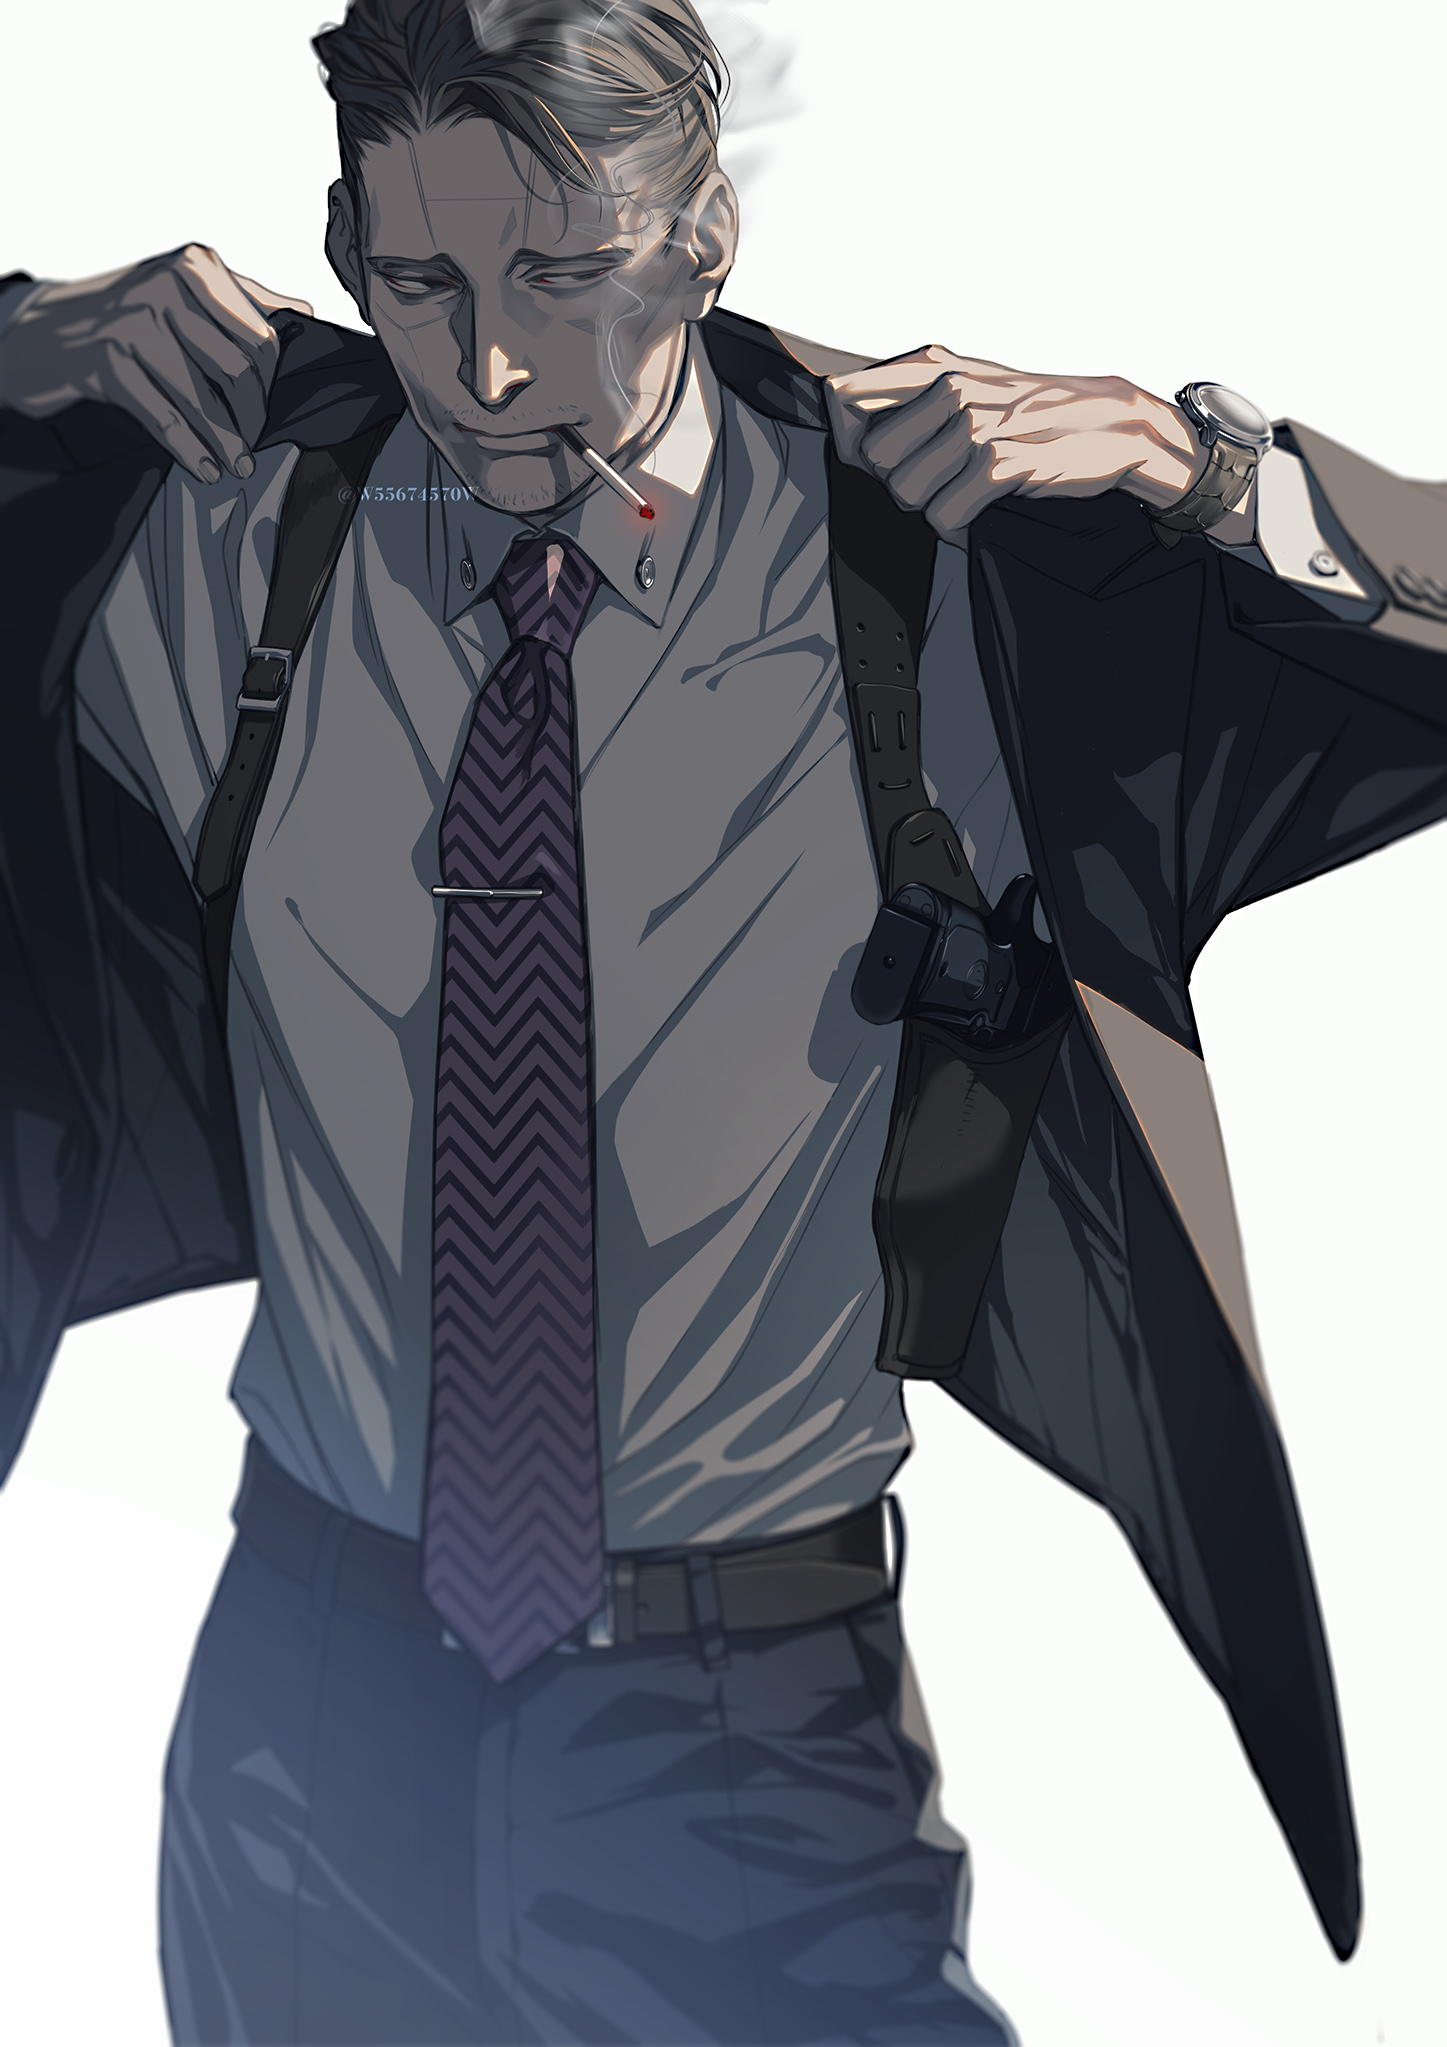 Golden Kamuy Holster Suit And Tie Cigarettes Belt Watch Smoking Anime Men Vertical Tie Suits Minimal 1447x2047